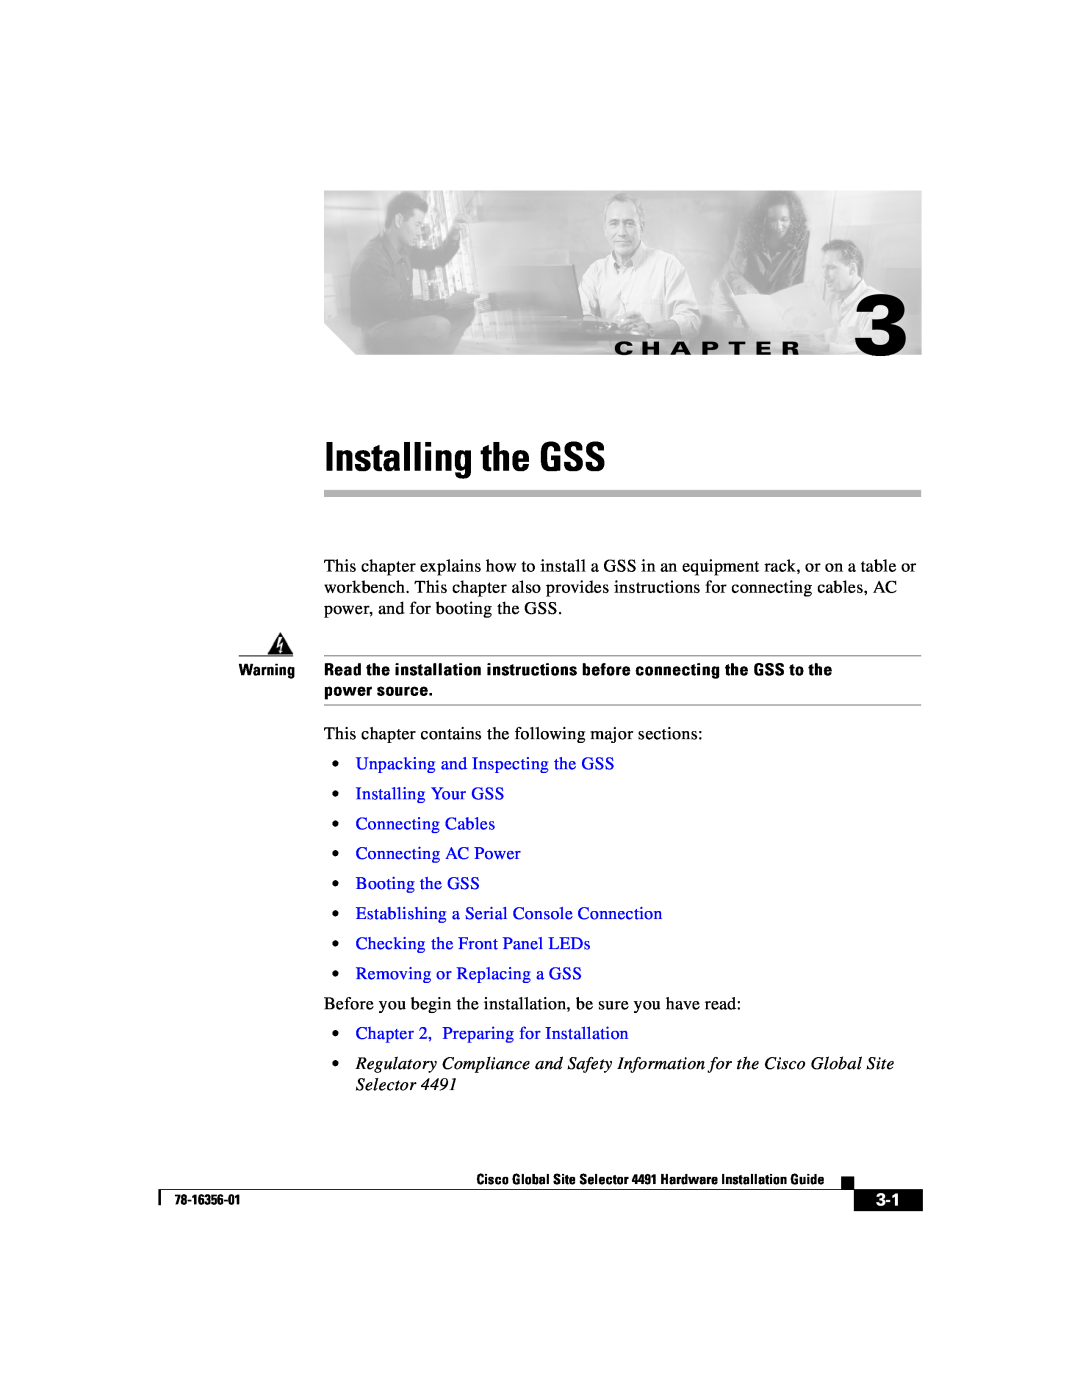 Cisco Systems 78-16356-01 manual Installing the GSS, C H A P T E R, Unpacking and Inspecting the GSS Installing Your GSS 